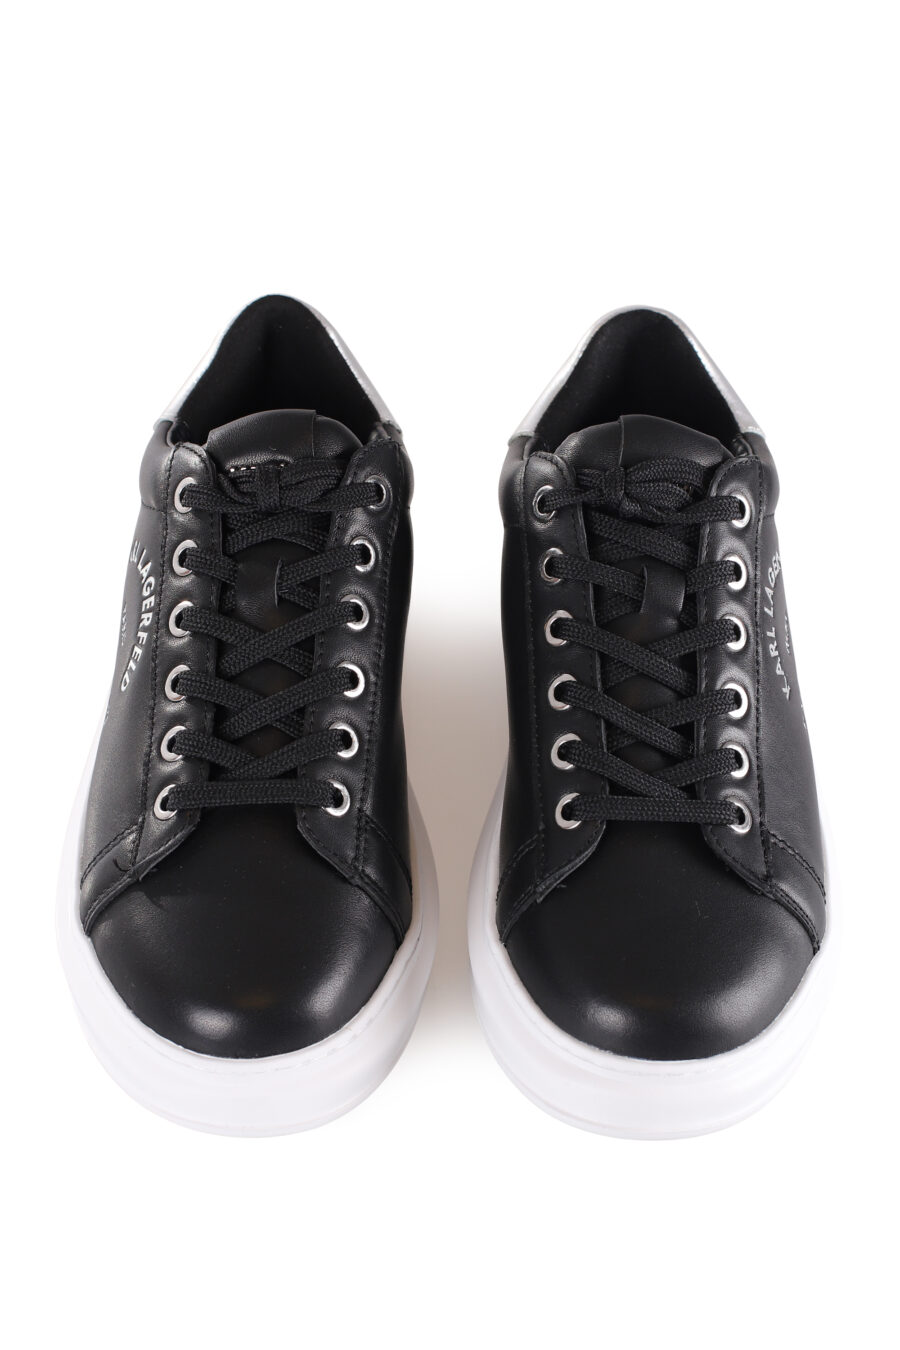 Black trainers with silver metal lettering logo - IMG 9597